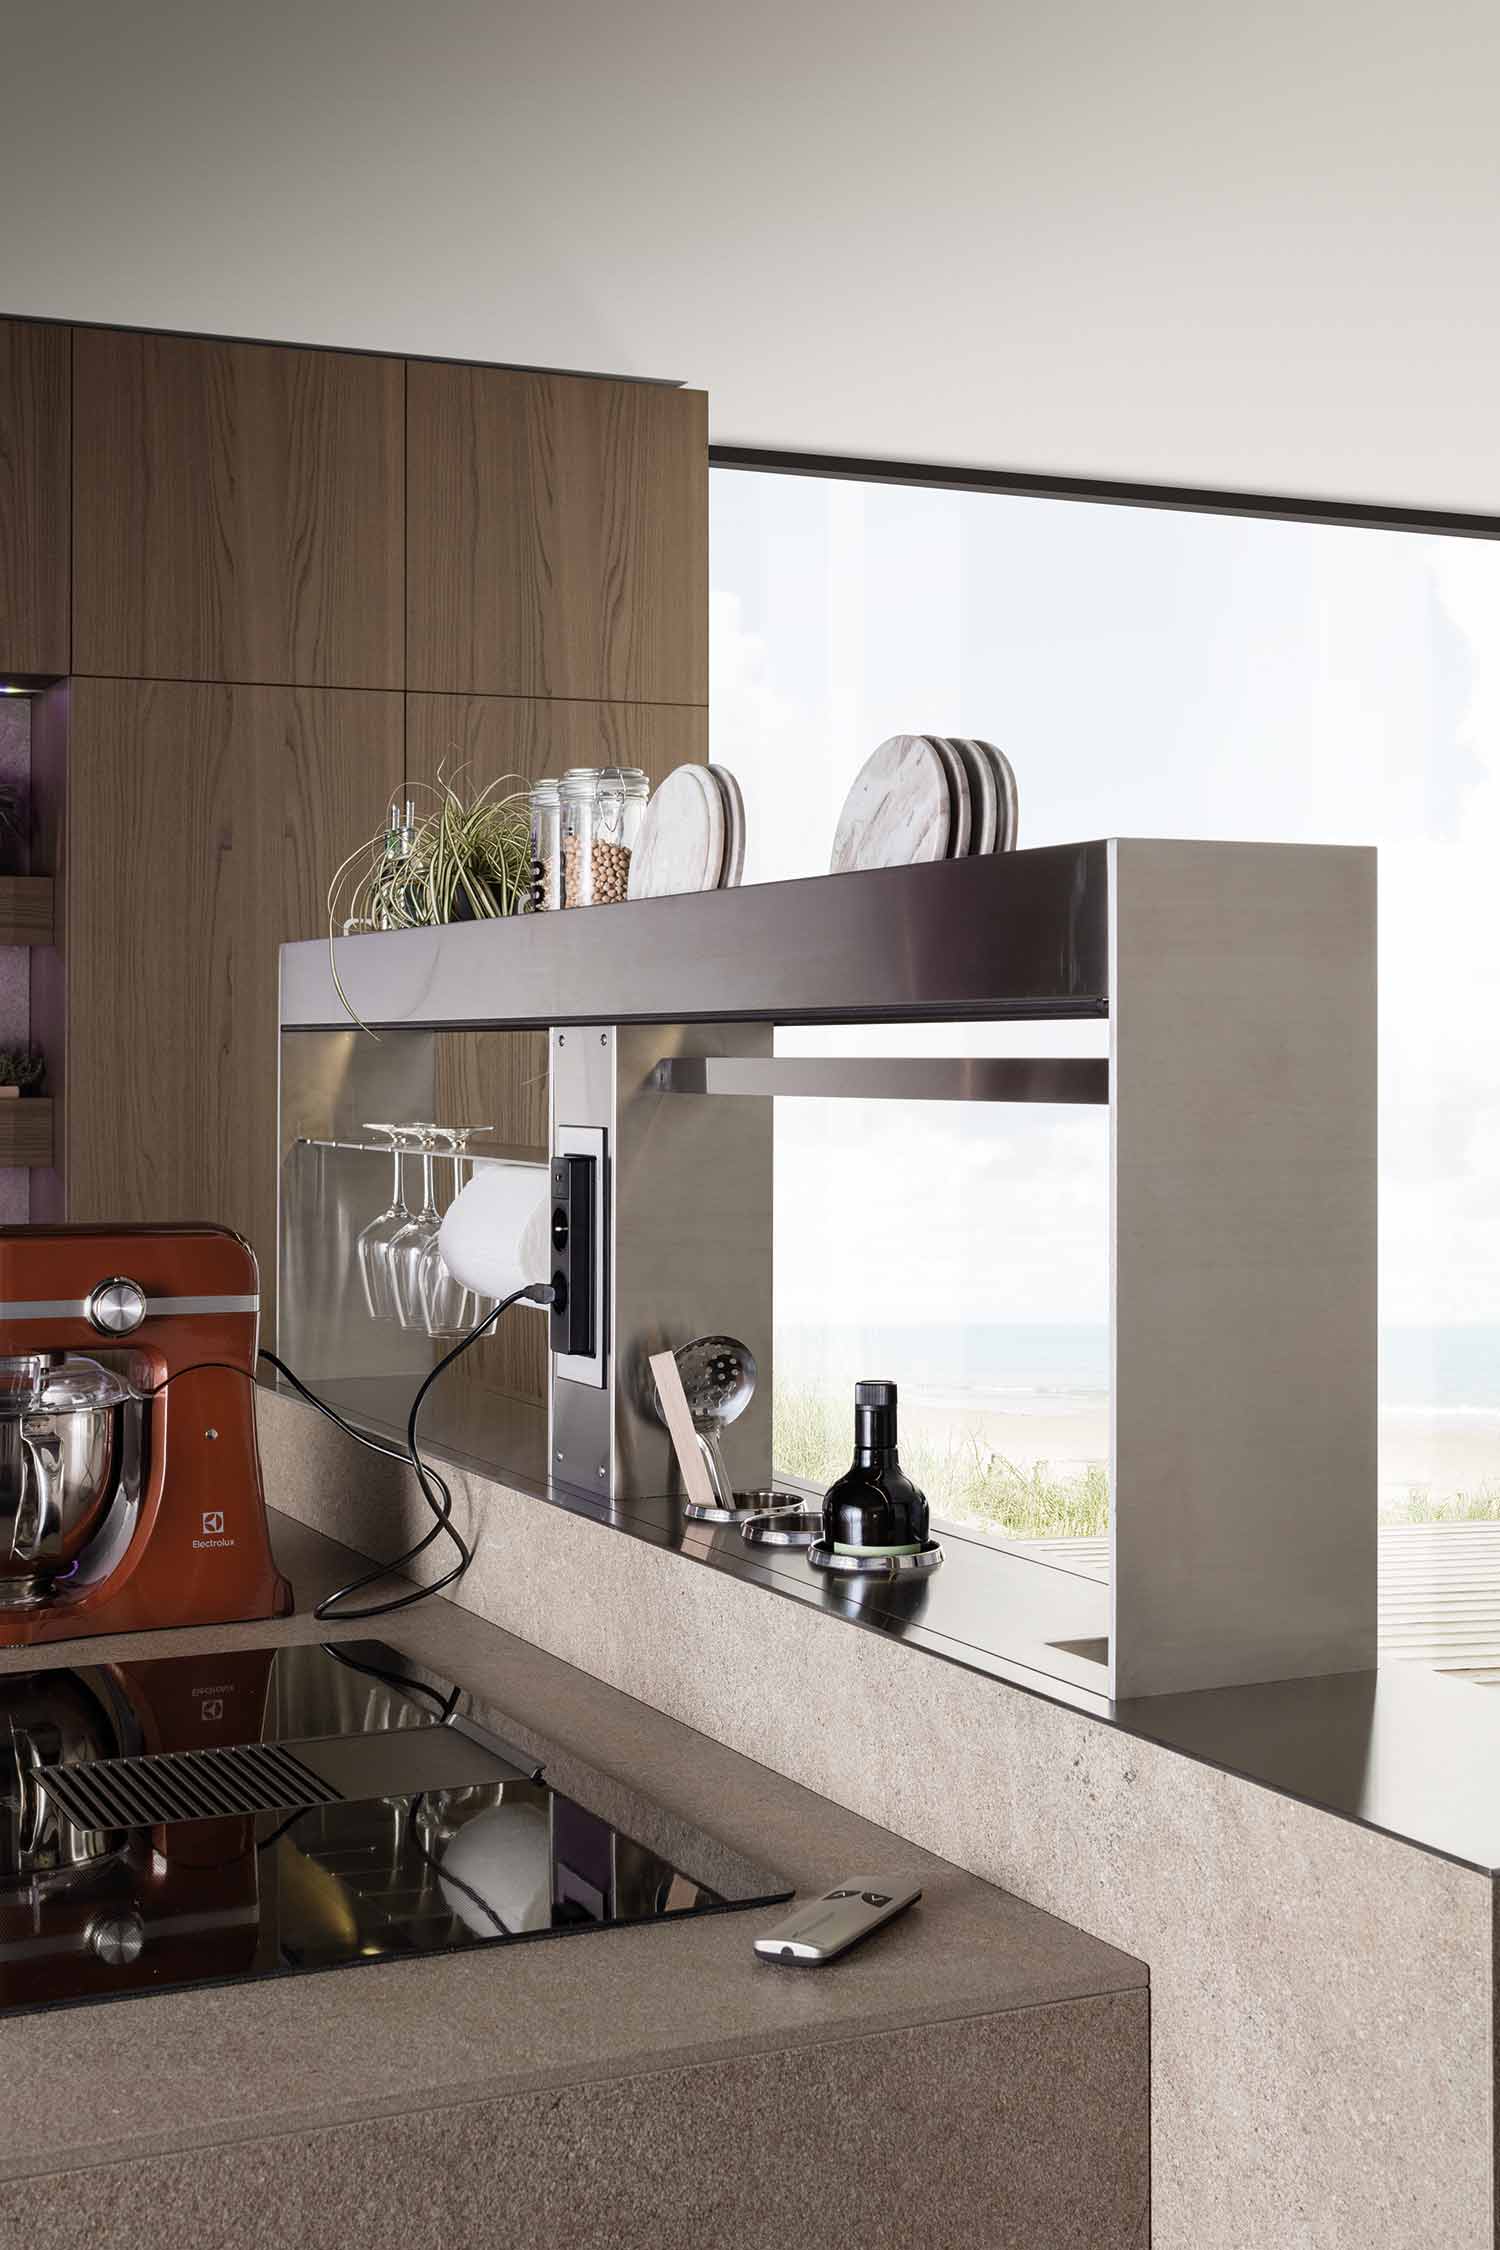 Stainless steel bar ensures a well-accessorised peninsular with the aid of a plate and glass rack with close-by power outlets. Raised and lowered with the aid of a remote control.